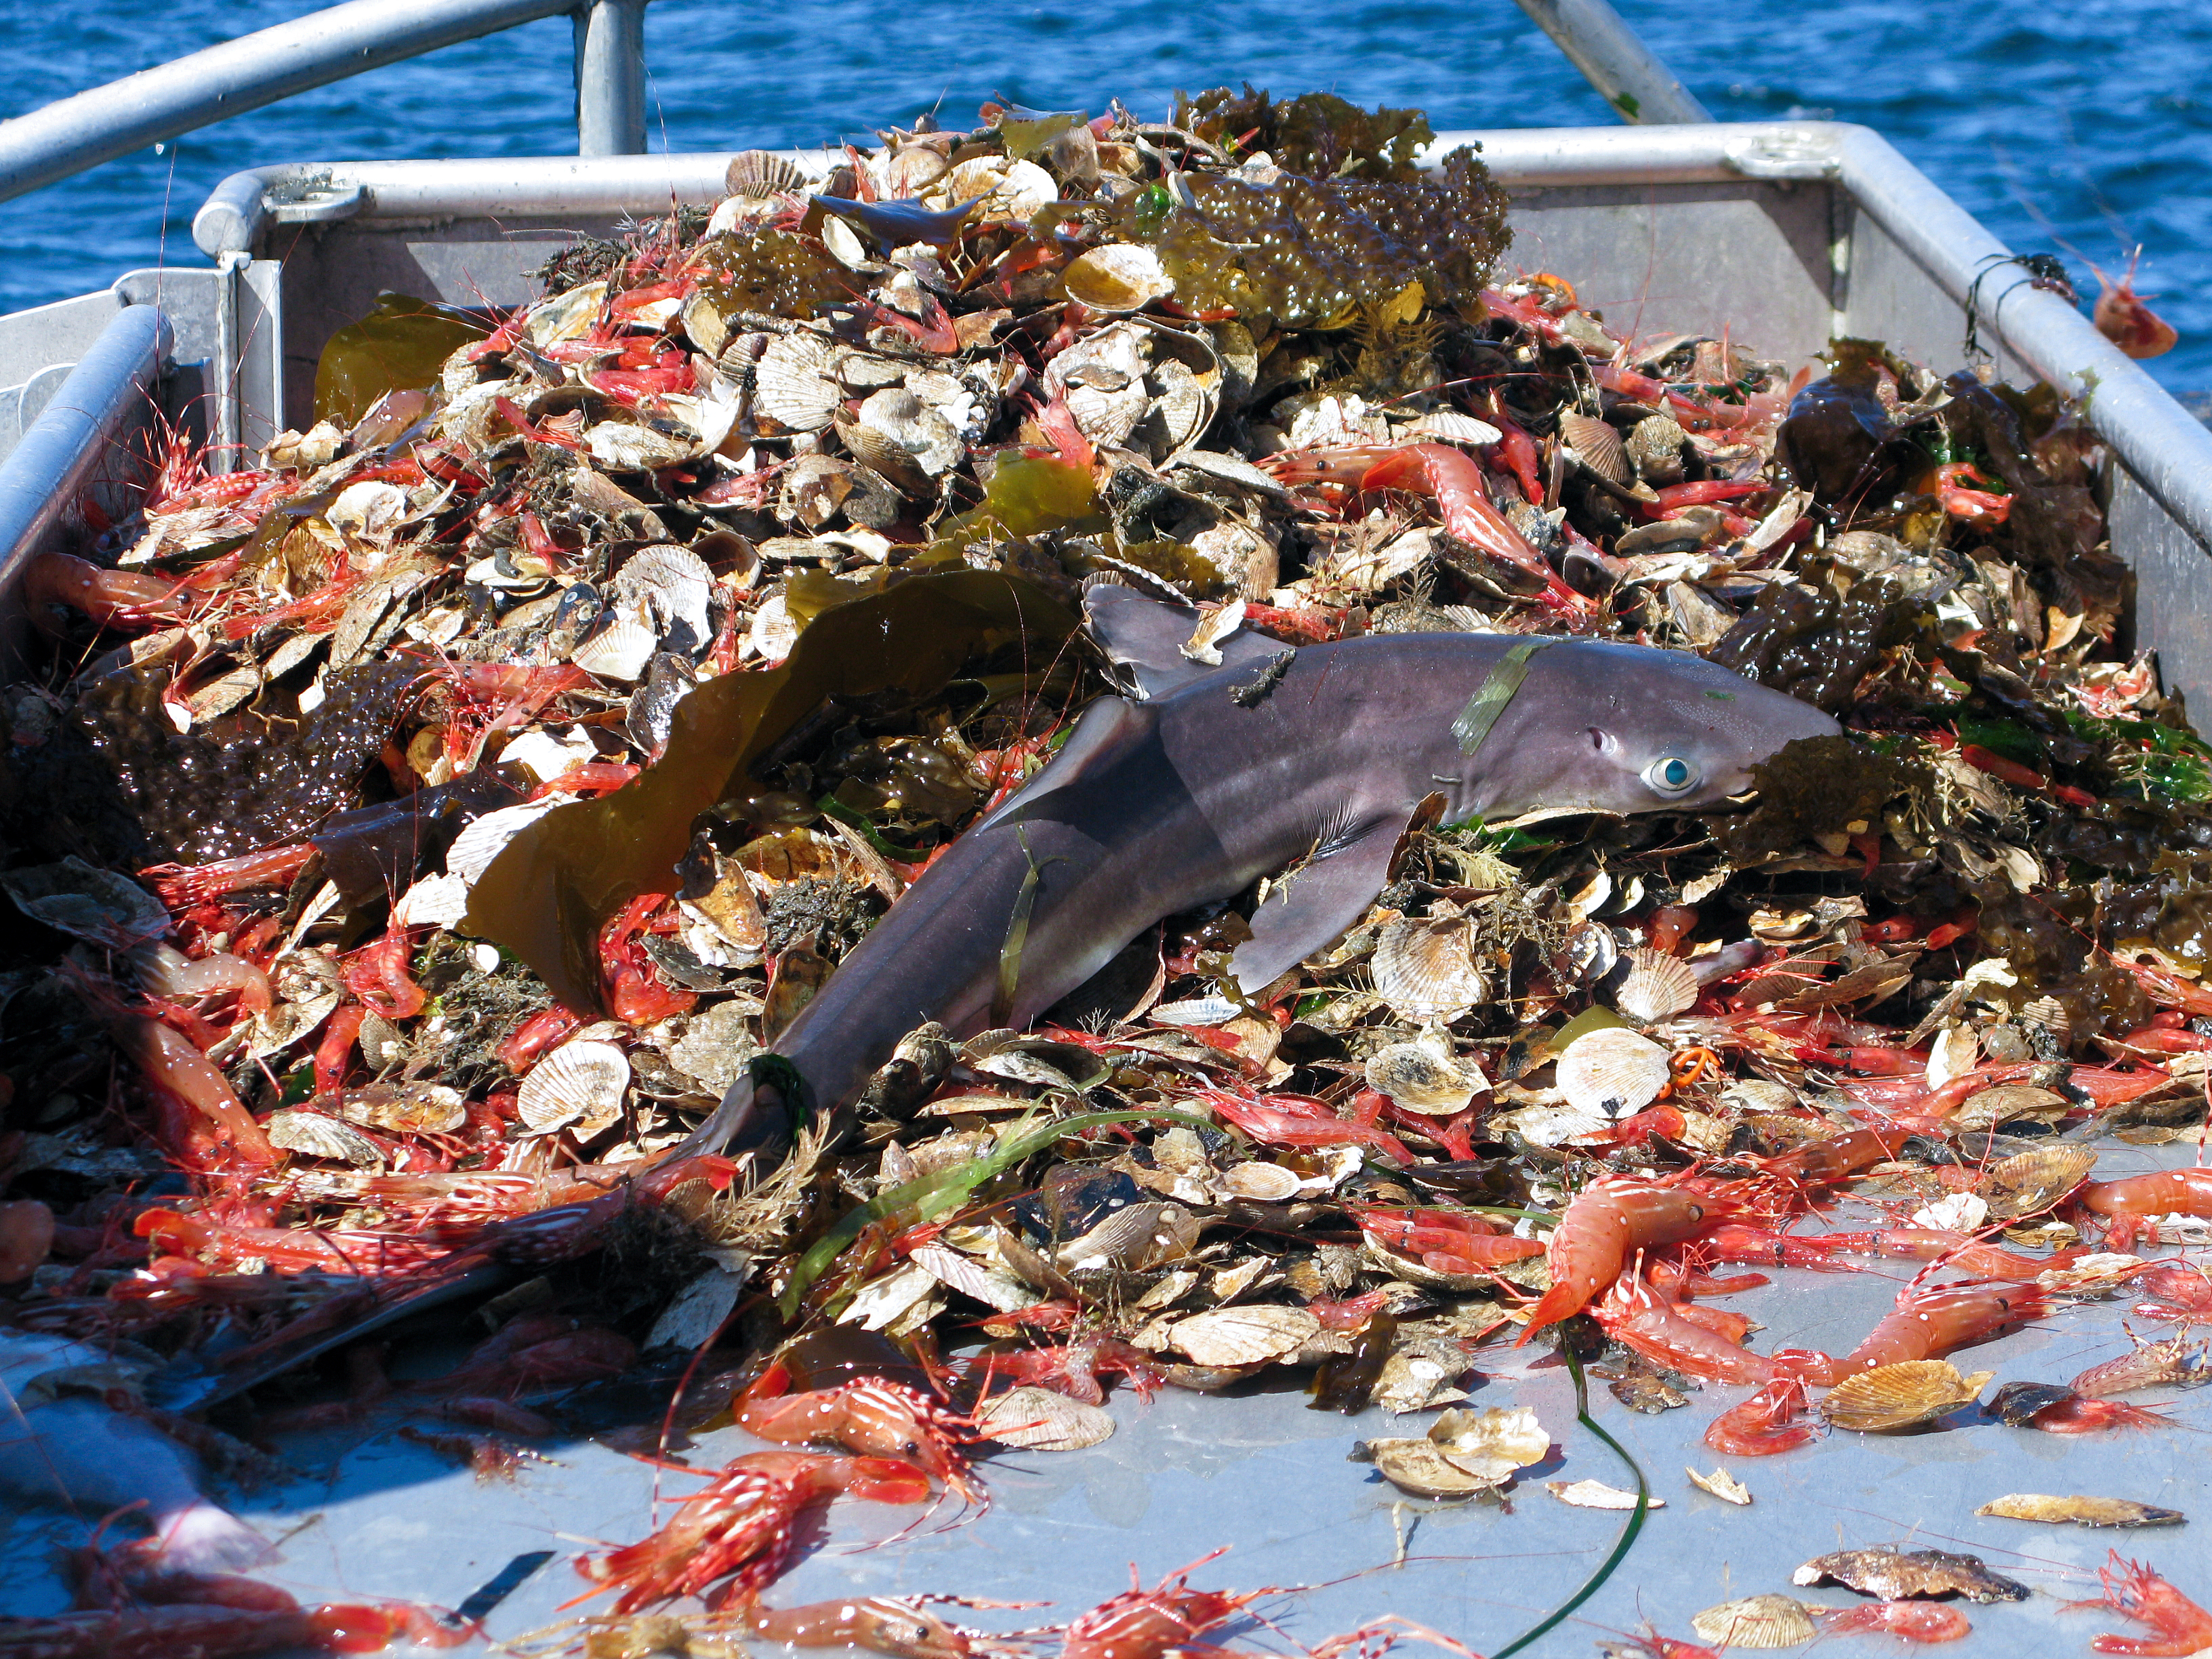 Bottom trawling is not a sustainable fishing method. It results in vast amounts of bycatch, such as this shark and crabs.